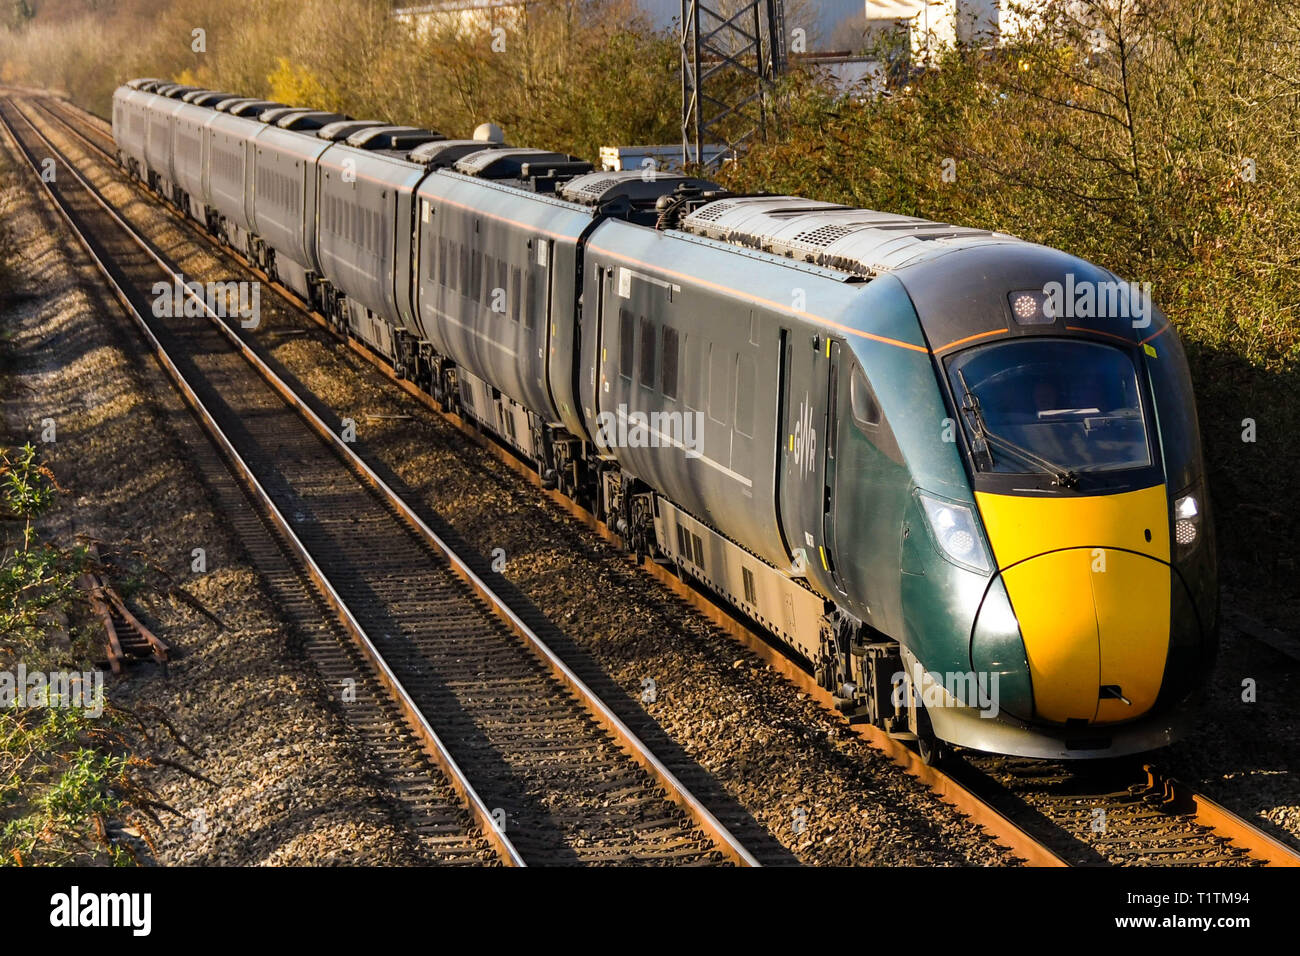 PONTYCLUN, WALES - MARCH 2019: London bound Class 800 inter city express train operated by Great Western Railway passing through Pontyclun in South Wa Stock Photo